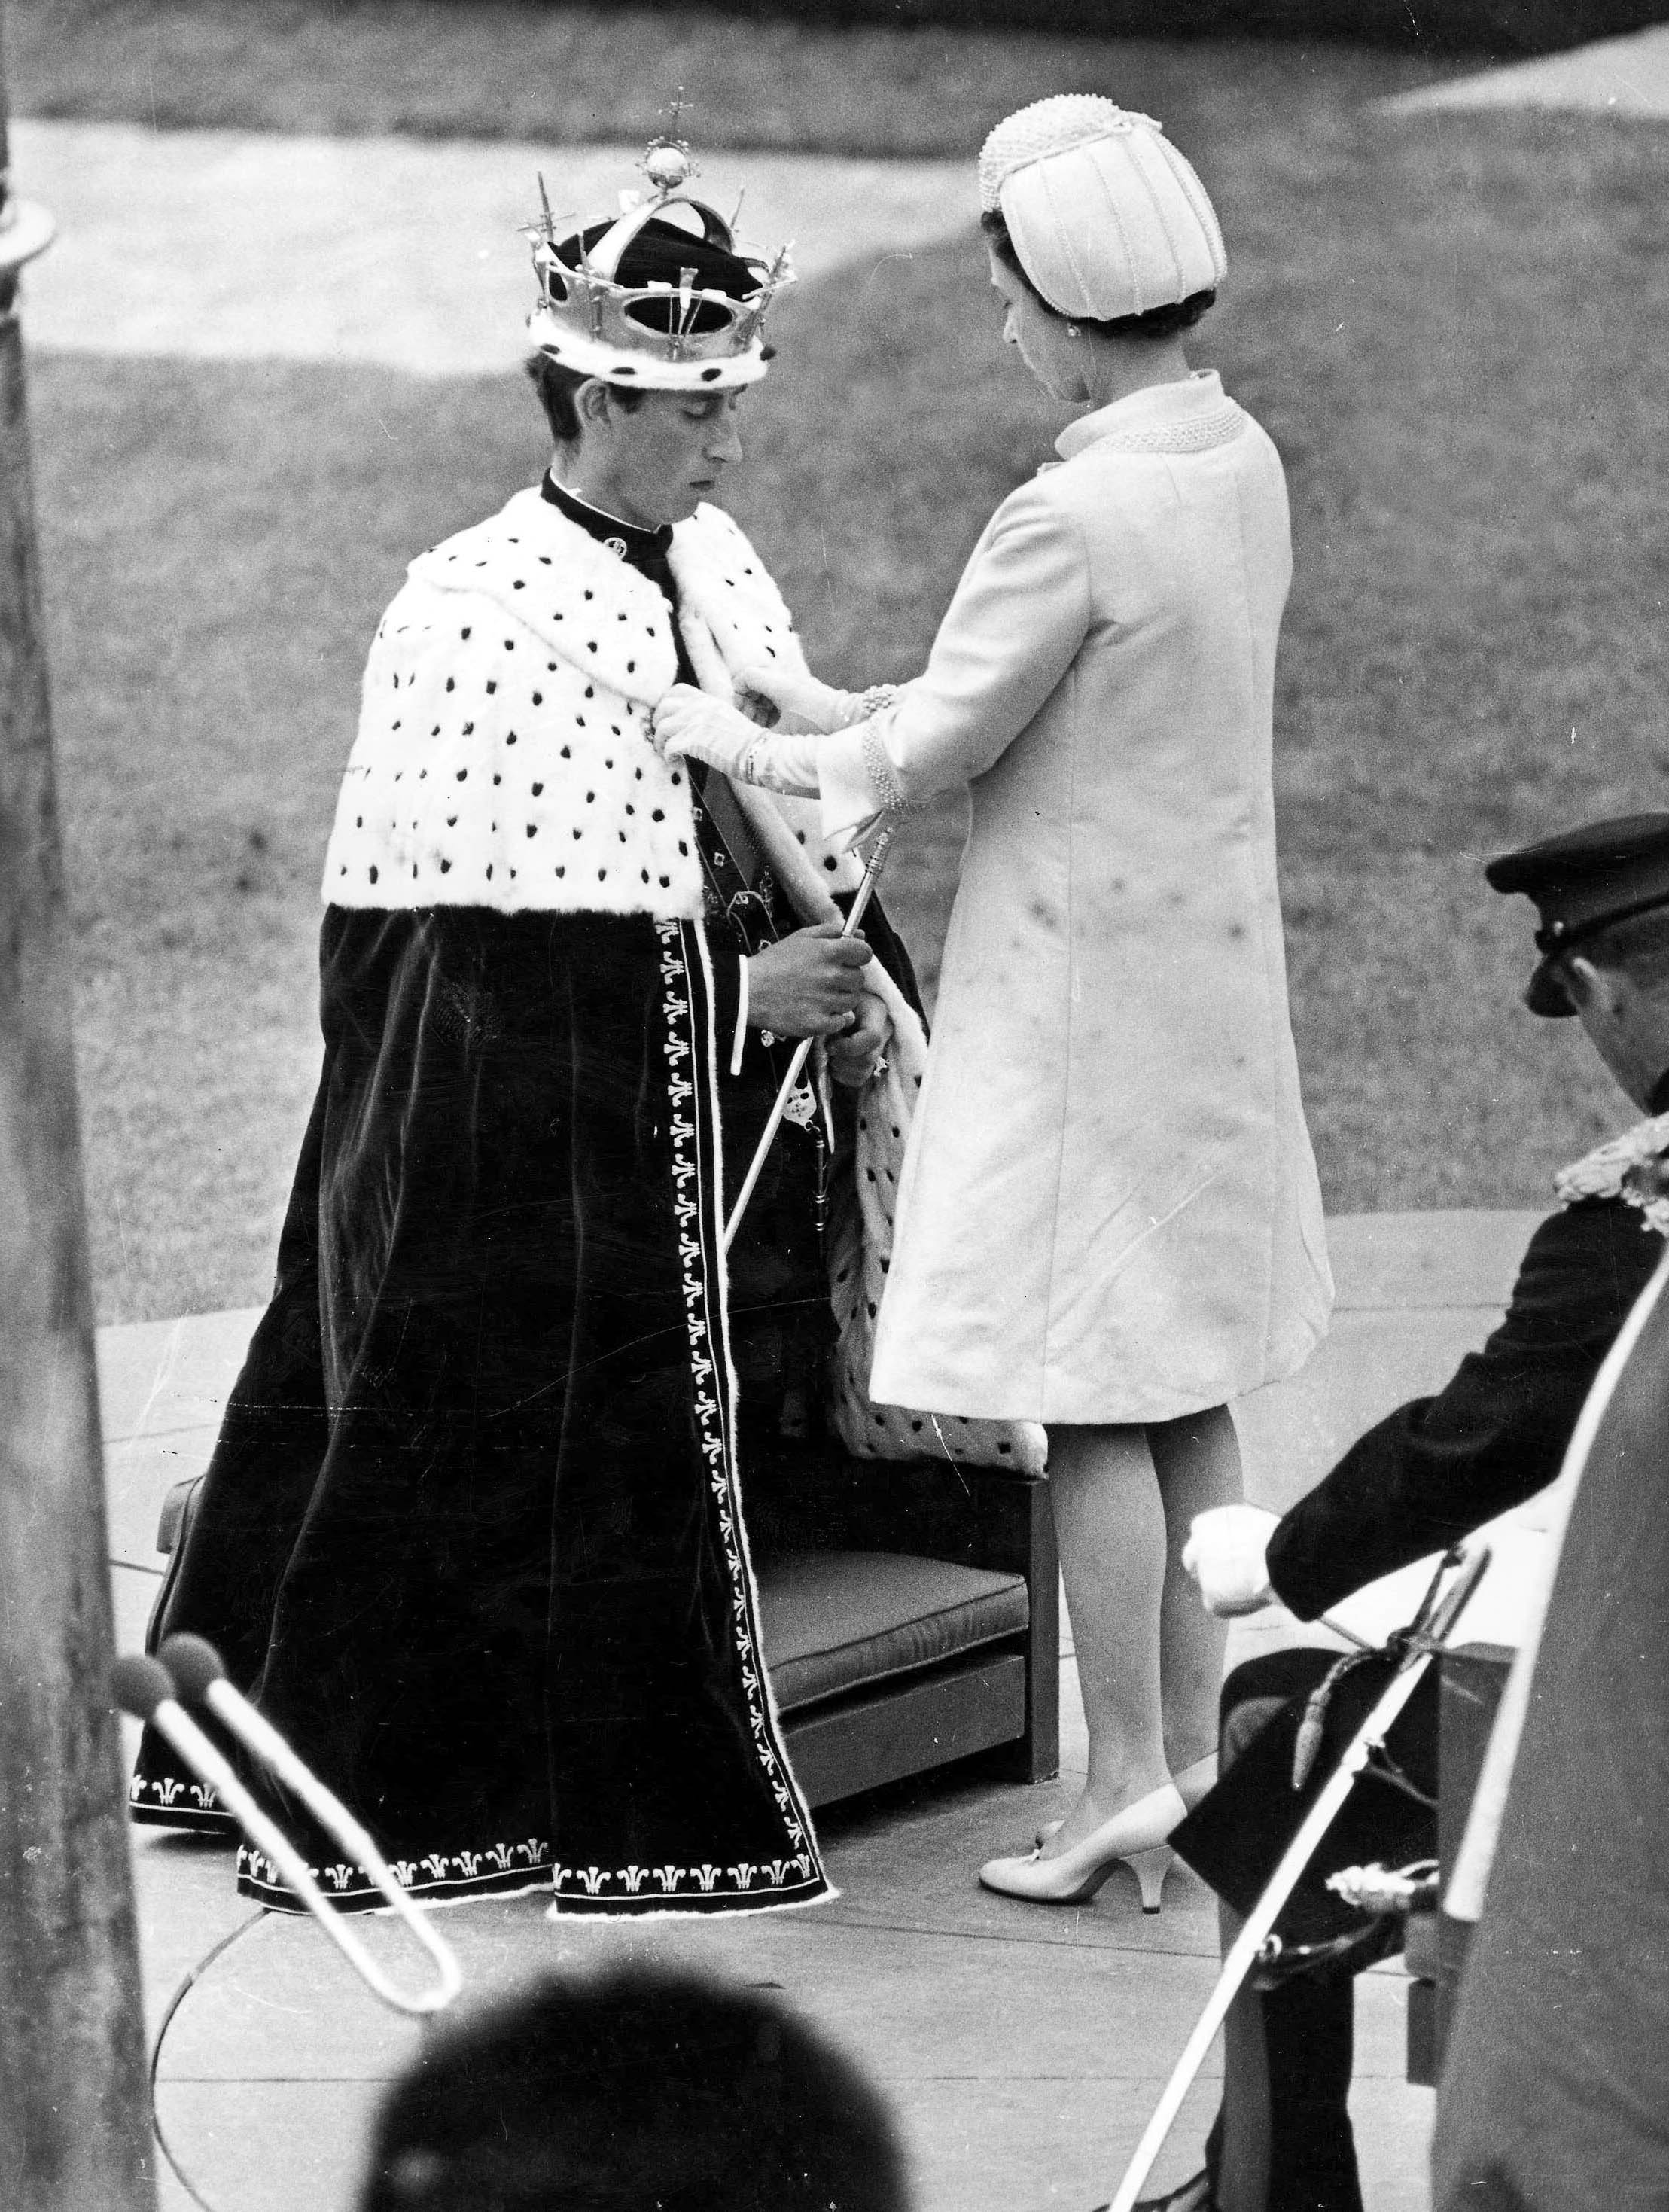 Queen Elizabeth II fastened the ermine mantle around the shoulders of Prince Charles at Caerarvon Castle, during the investiture of Prince Charles as Prince of Wales,in July 1969 | Source: Getty Images